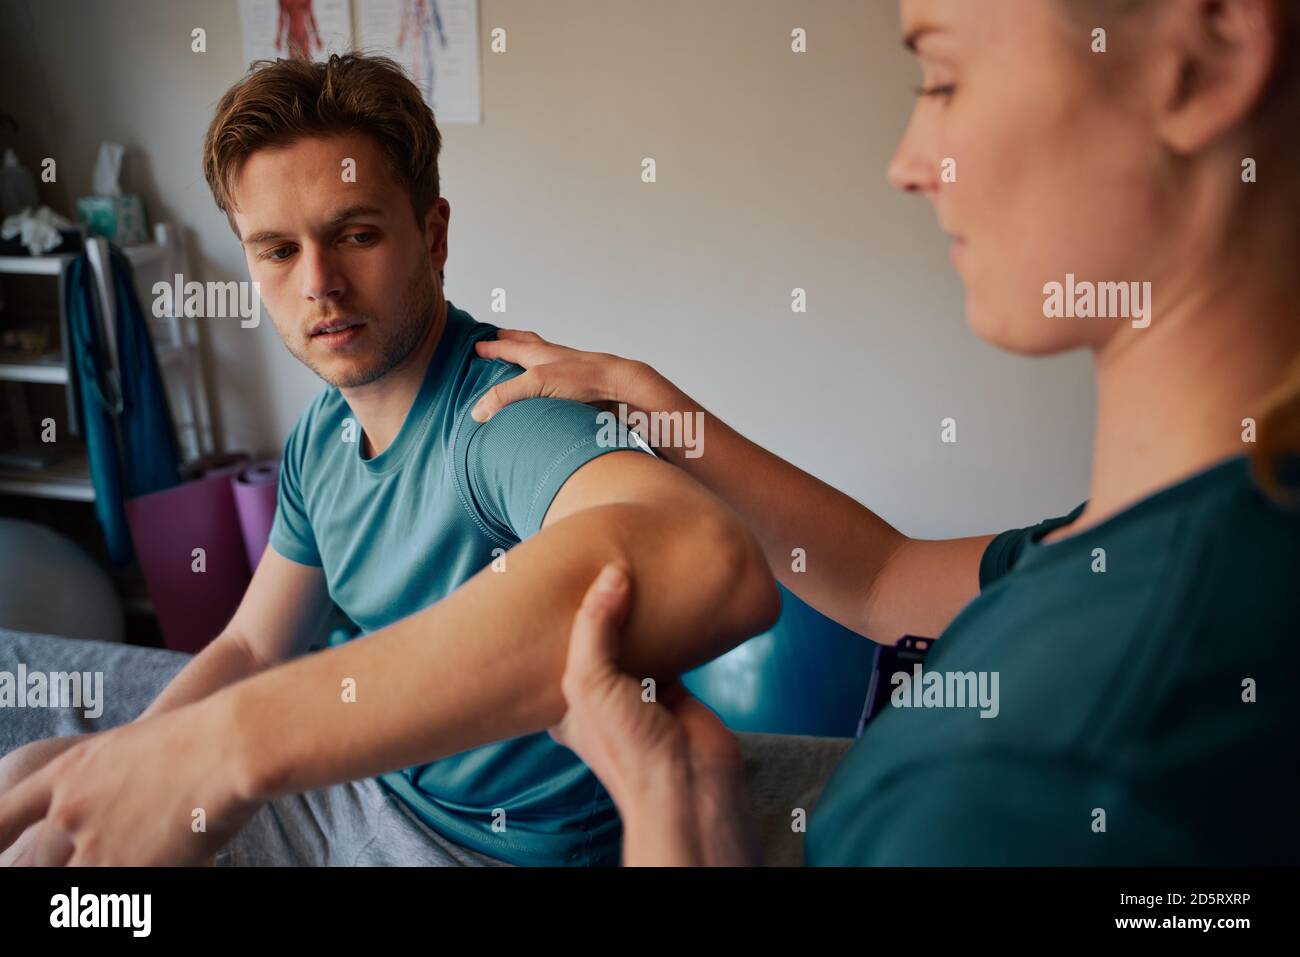 Young man undergoing physiotherapy treatment for hand injury with woman doctor Stock Photo